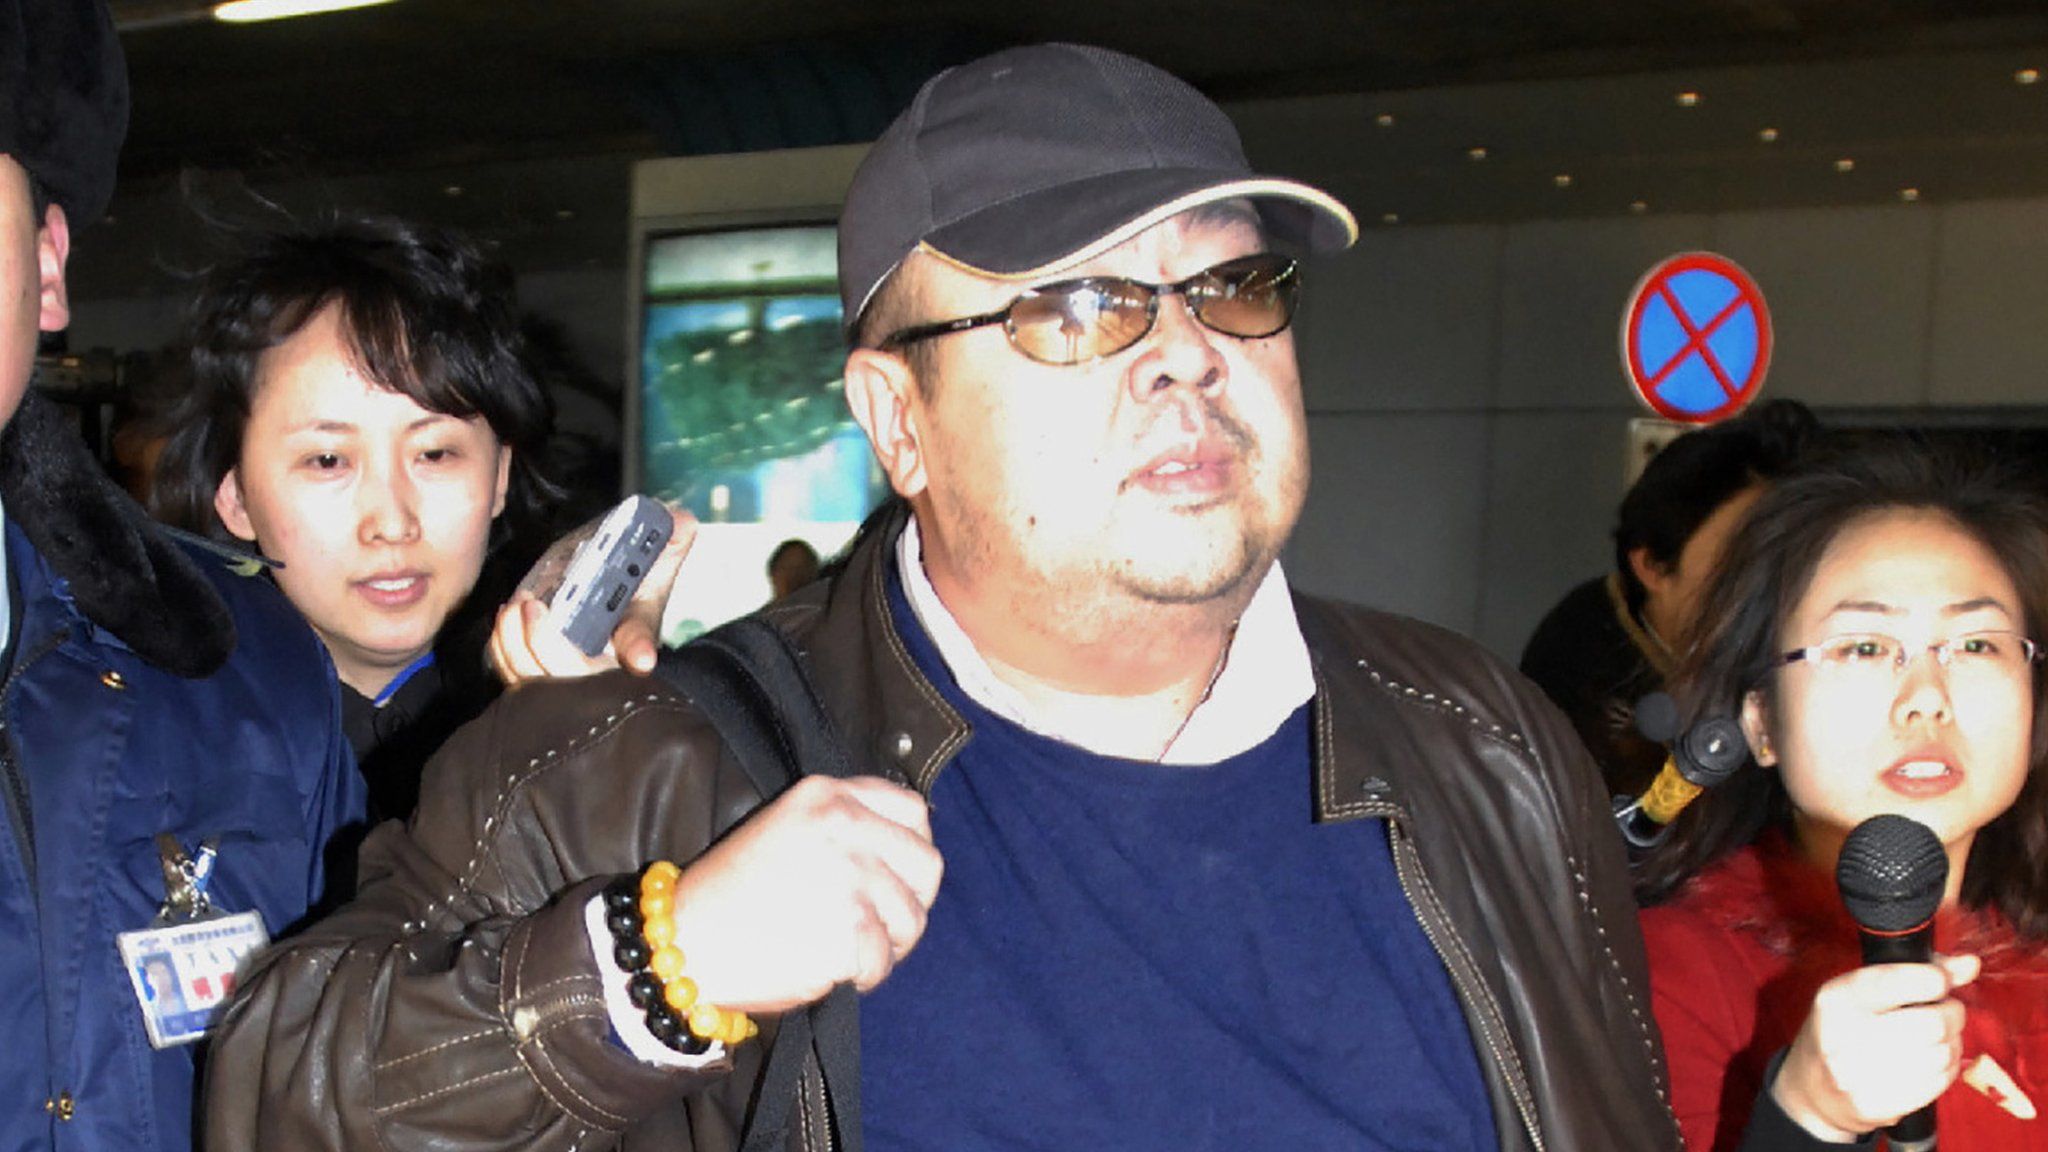 This photo taken on February 11, 2007 shows a man believed to be then-North Korean leader Kim Jong-Il's eldest son, Kim Jong-Nam (C), walking amongst journalists upon his arrival at Beijing's international airport